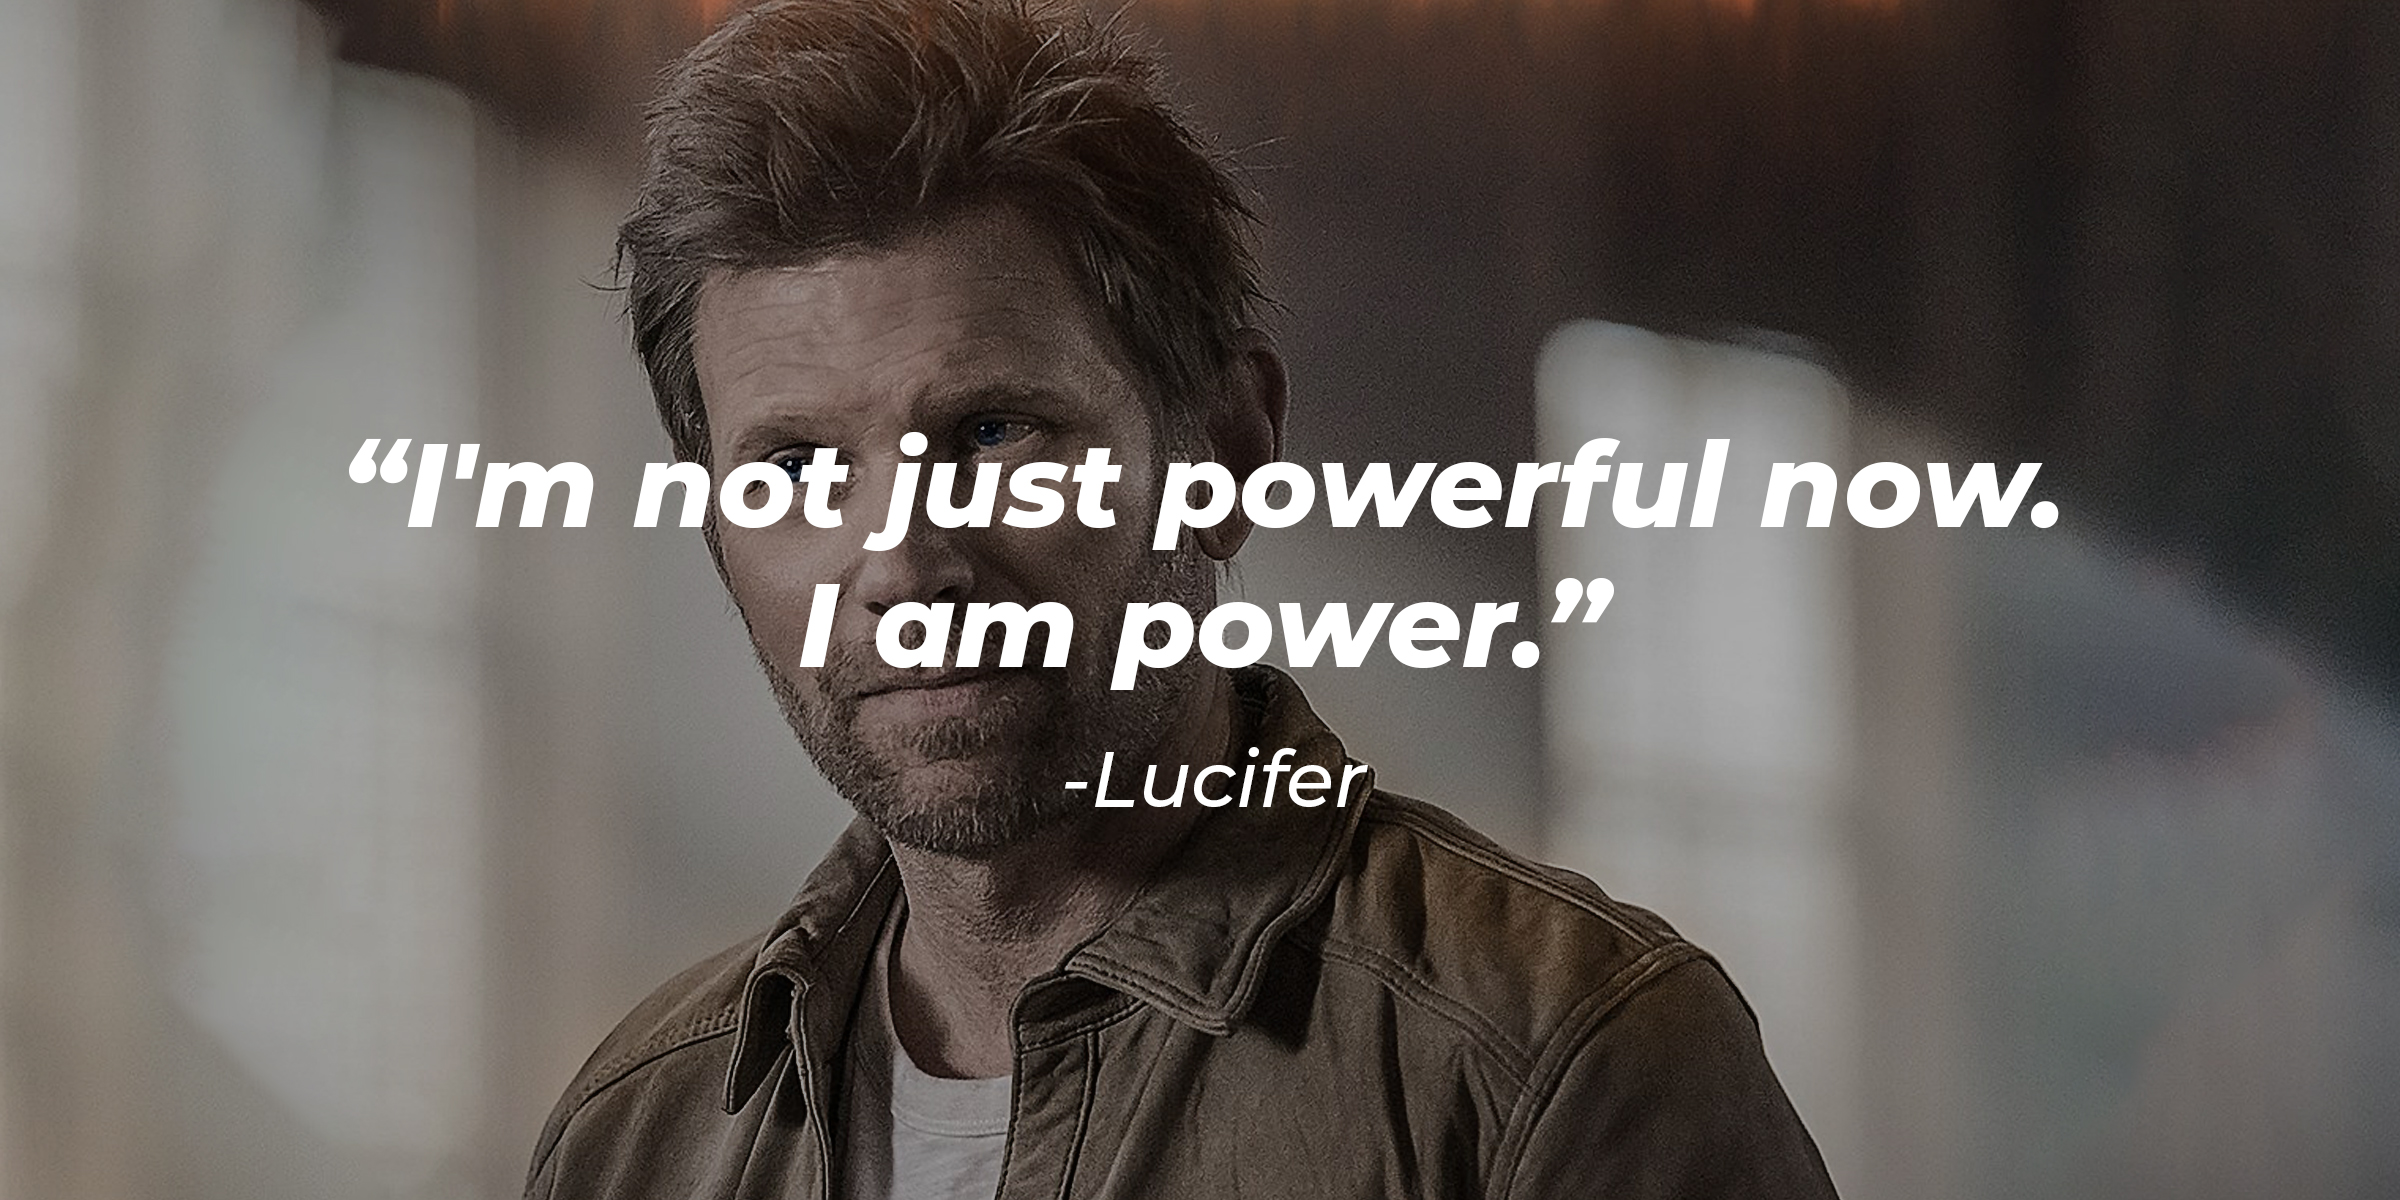 An image of Lucifer with his quote: “I'm not just powerful now. I am power.” | Source: Facebook.com/Supernatural